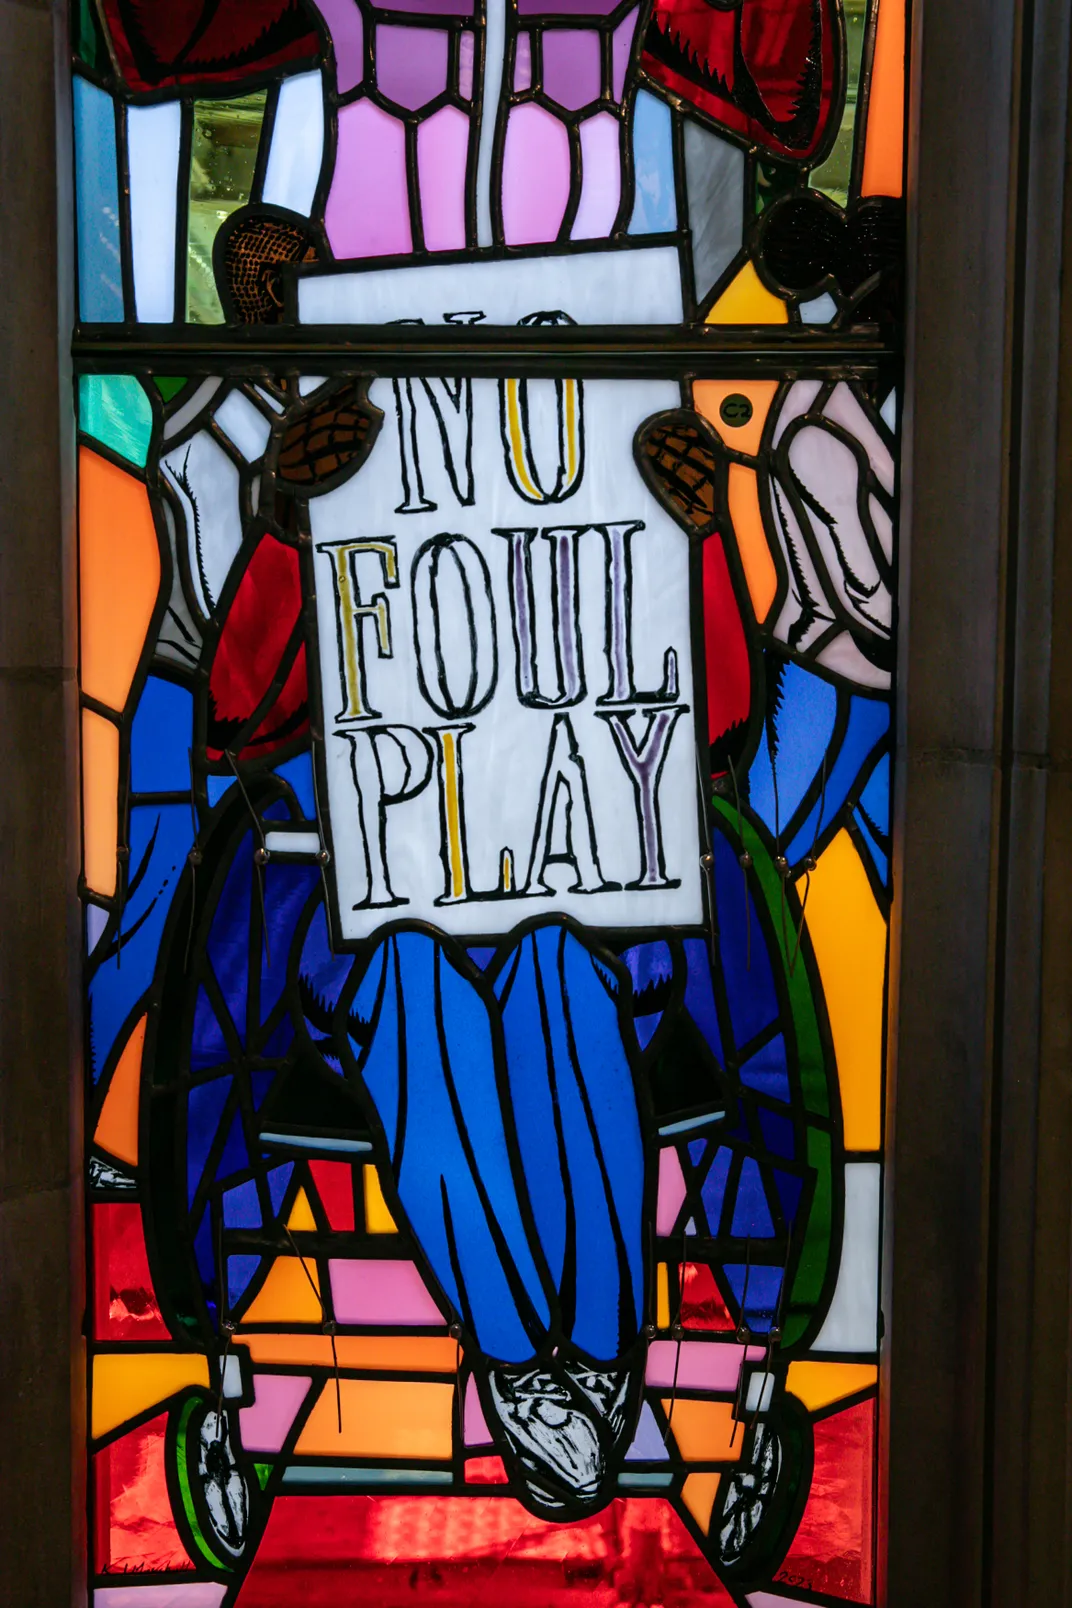 Close-up shot of stained-glass window showing protester in wheelchair holding sign